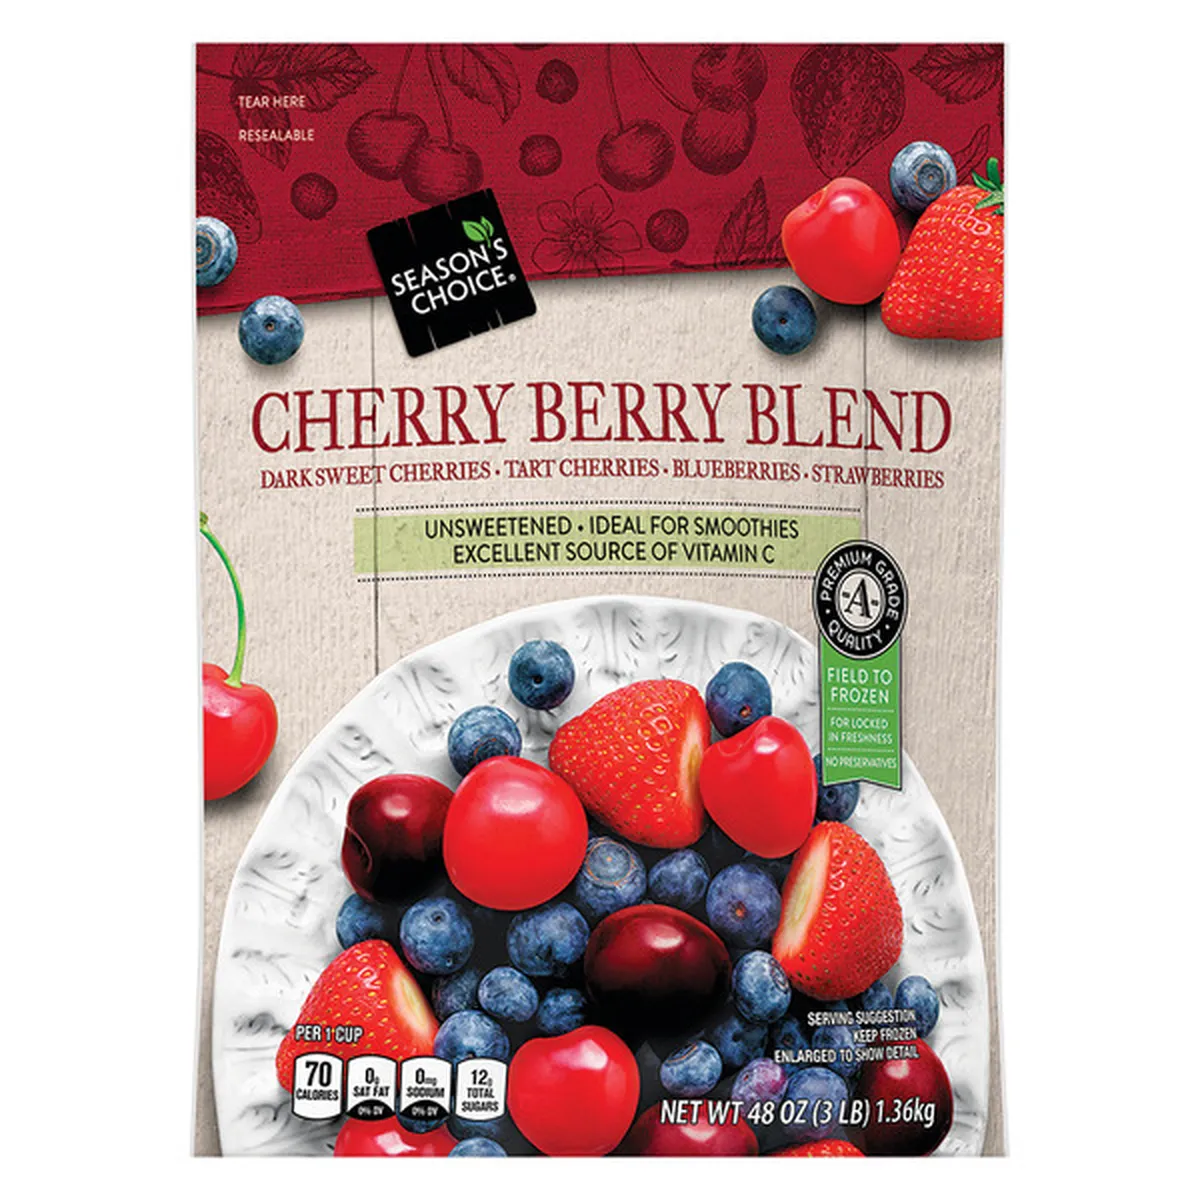 Season's Choice Cherry Berry Blend Dark Sweet Cherries, Tart Cherries,  Blueberries, Strawberries (48 oz) Delivery or Pickup Near Me - Instacart